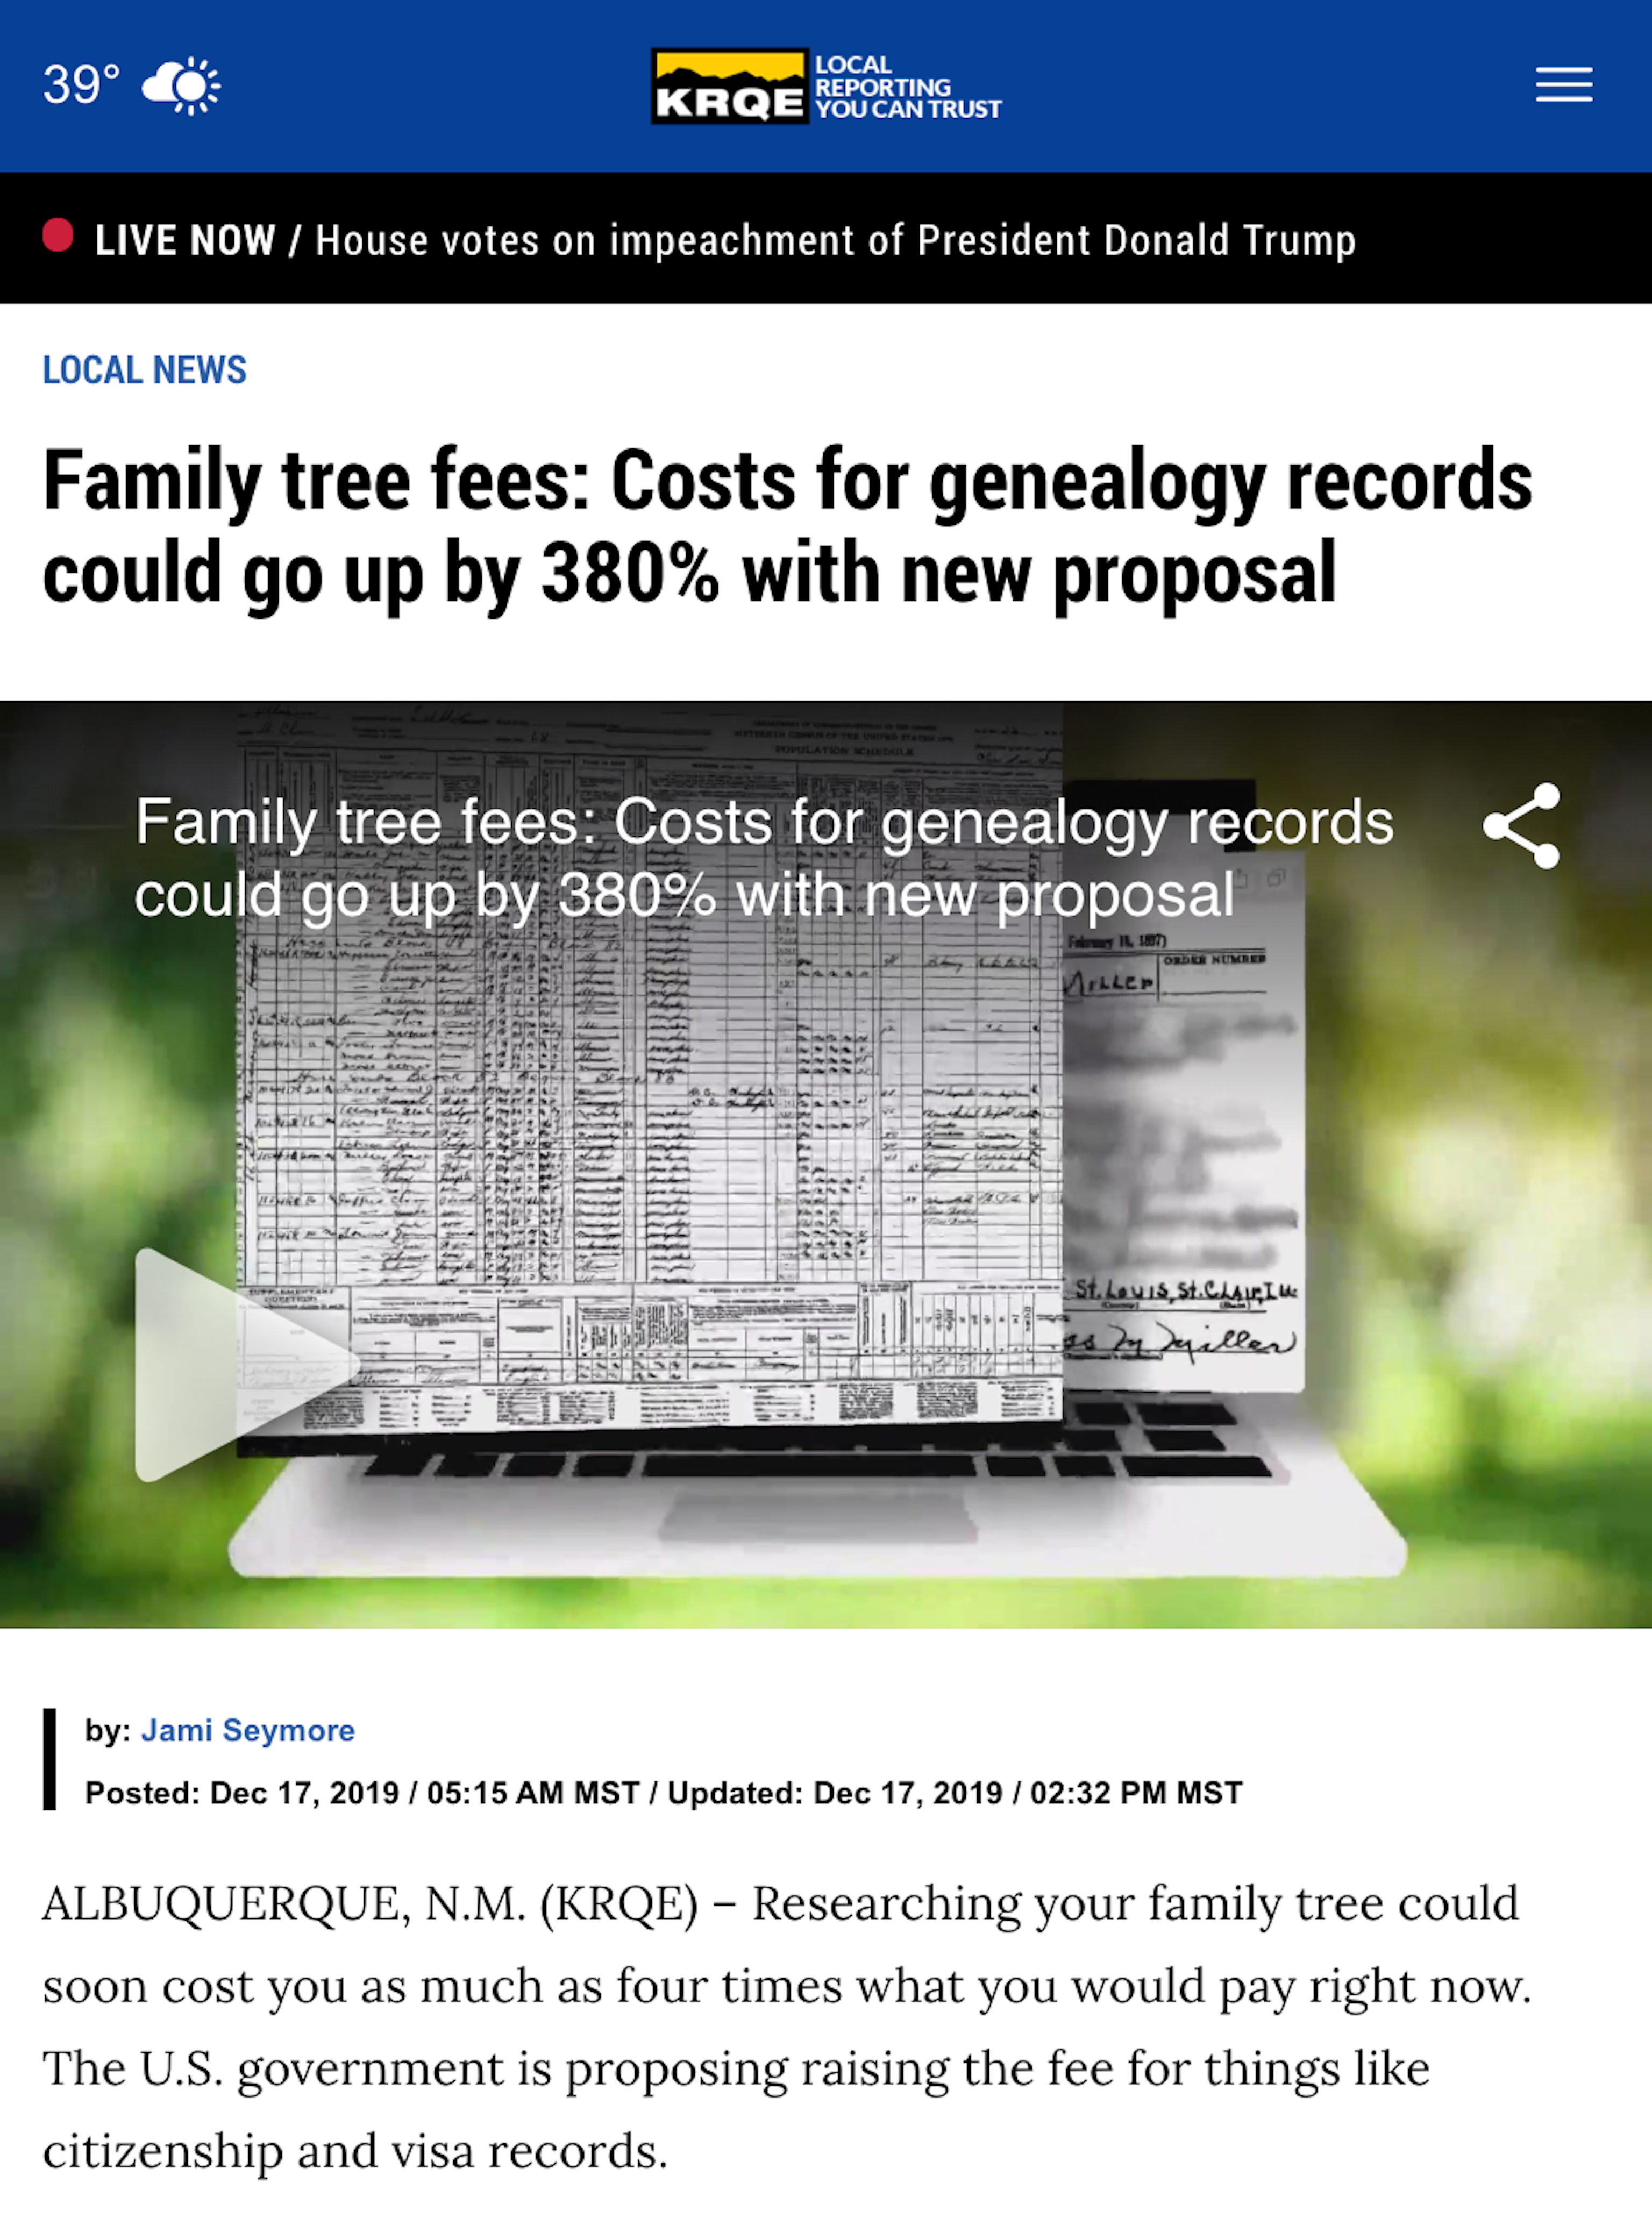 Family tree fees: Costs for genealogy records could go up by 380% with new proposal